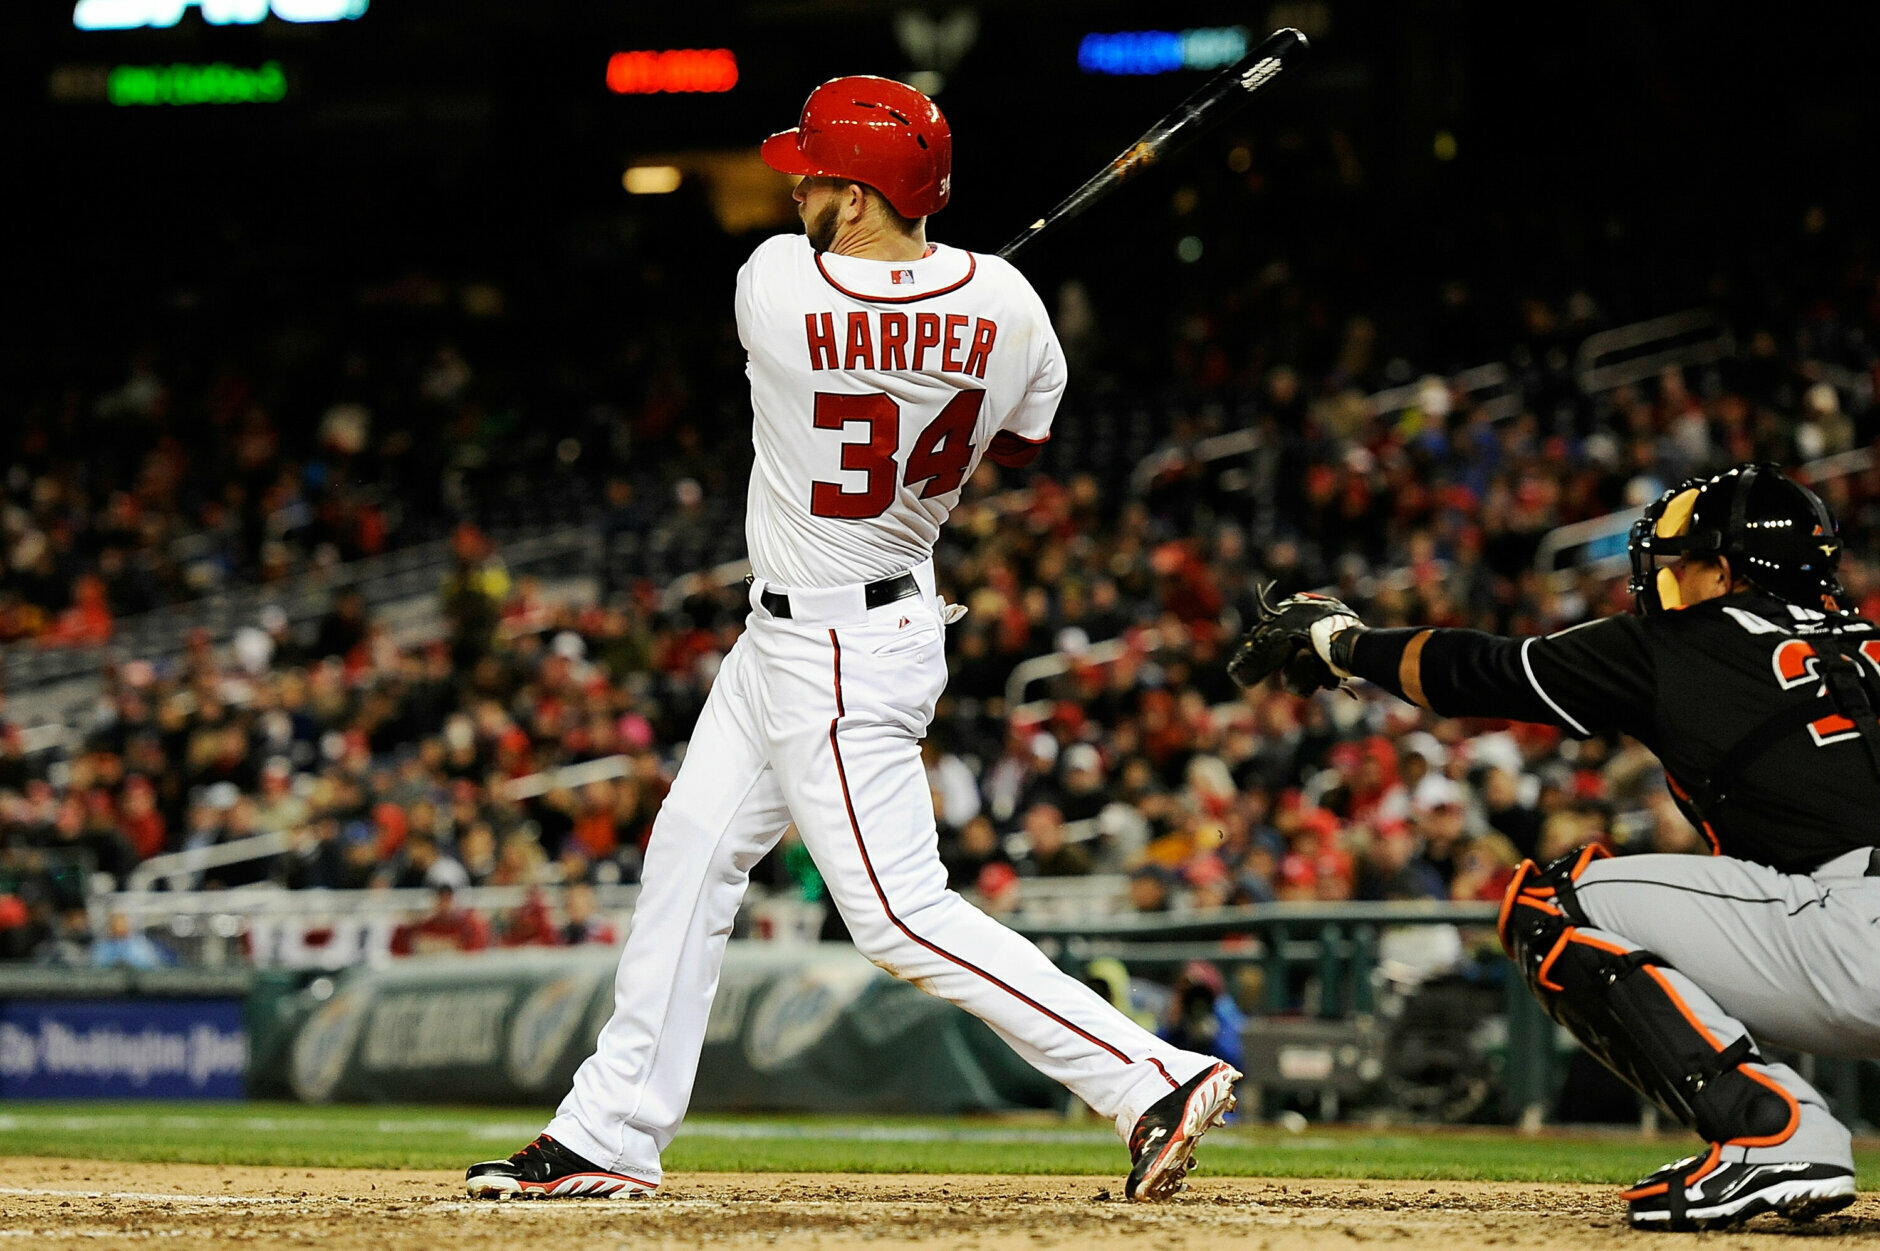 WASHINGTON, DC - APRIL 03:  Bryce Harper #34 of the Washington Nationals hits a double to right field in the eighth inning during a game against the Miami Marlins at Nationals Park on April 3, 2013 in Washington, DC. The Nationals defeated the Marlins 3-0. (Photo by Patrick McDermott/Getty Images)